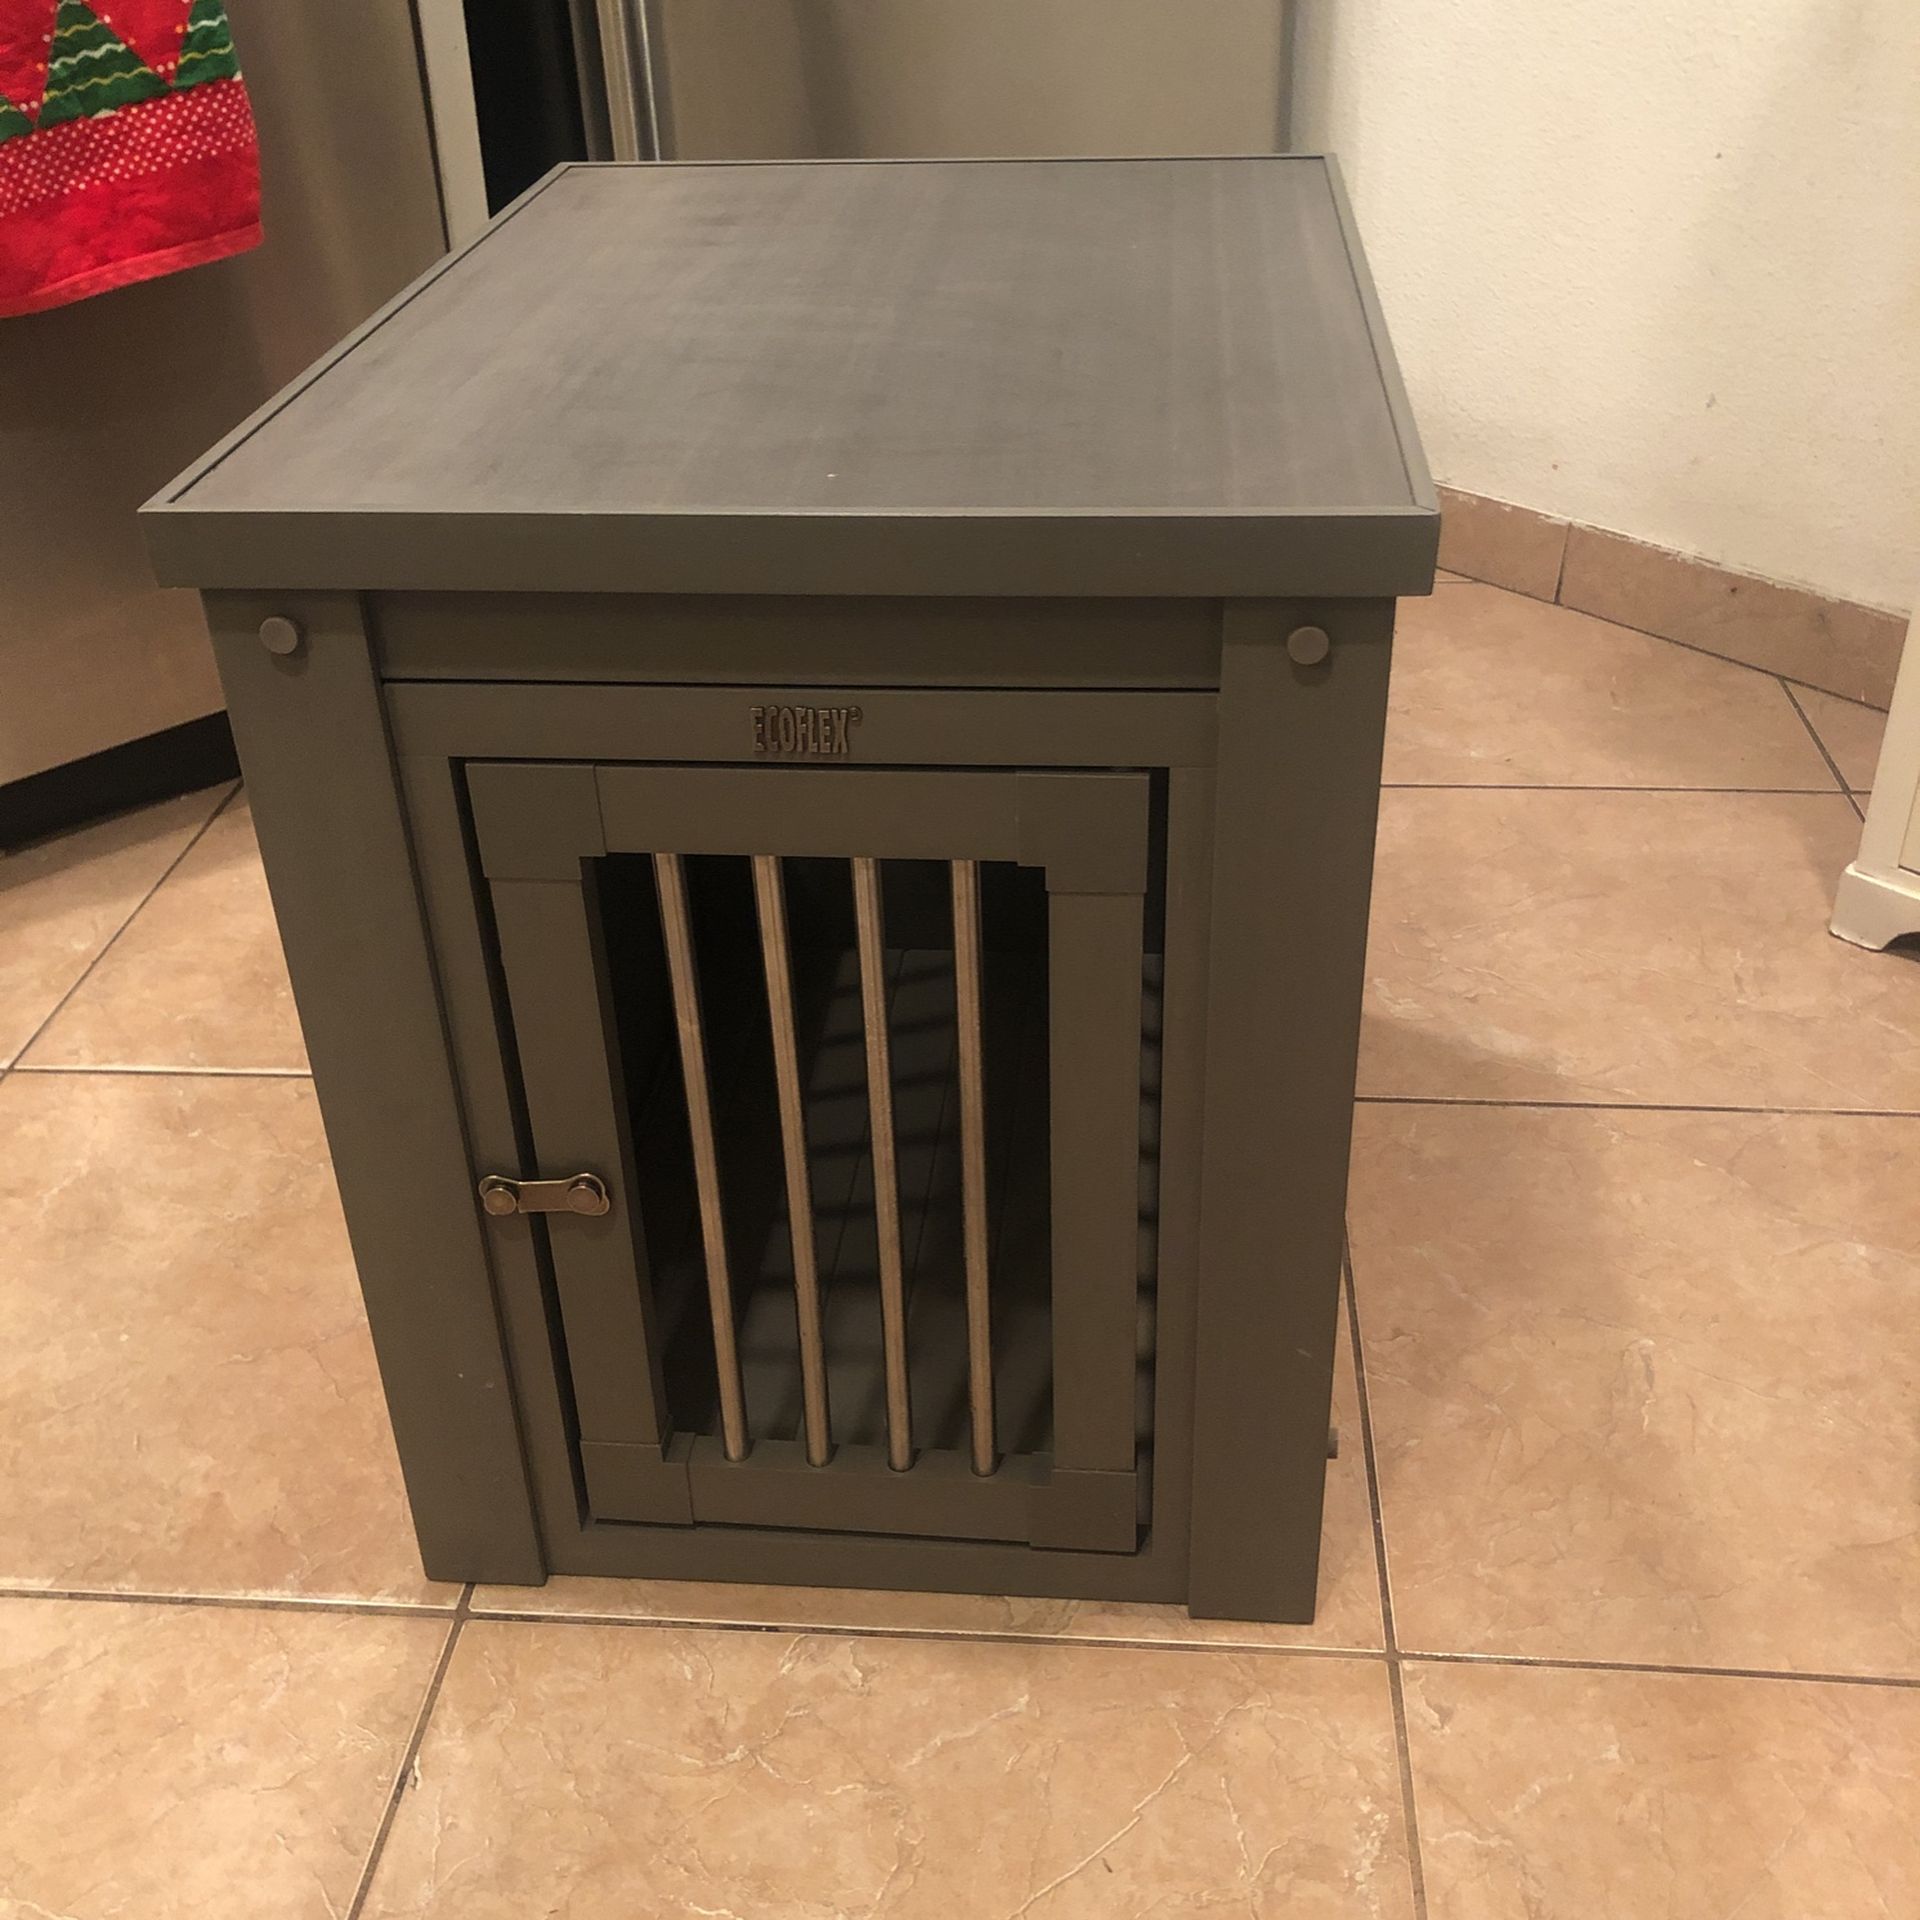 Ecoflex Dog crate/end table